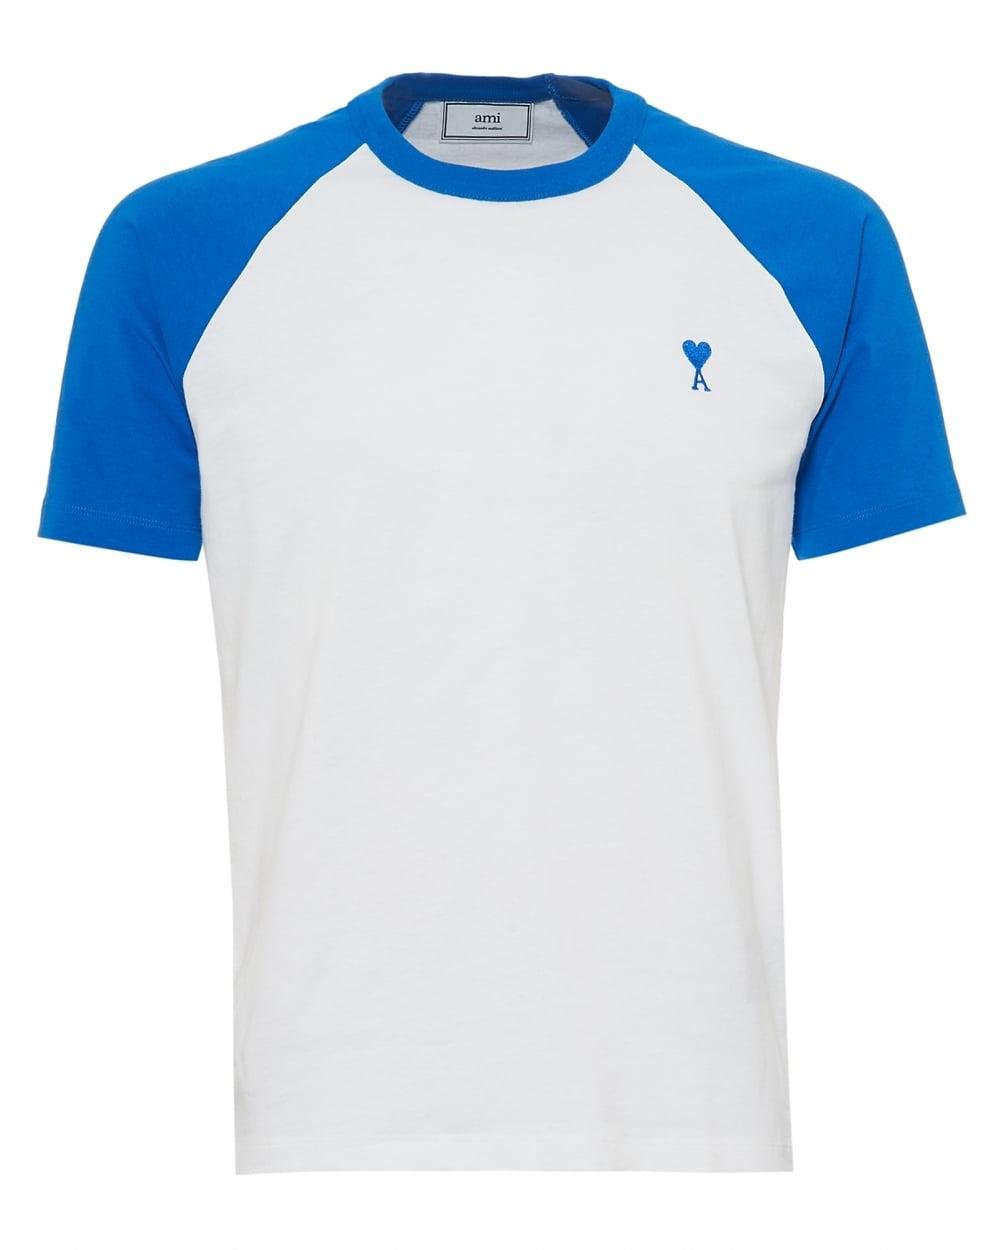 White and Blue T Logo - Ami Mens Contrast Shoulders T-Shirt, Plain Body White Blue Tee